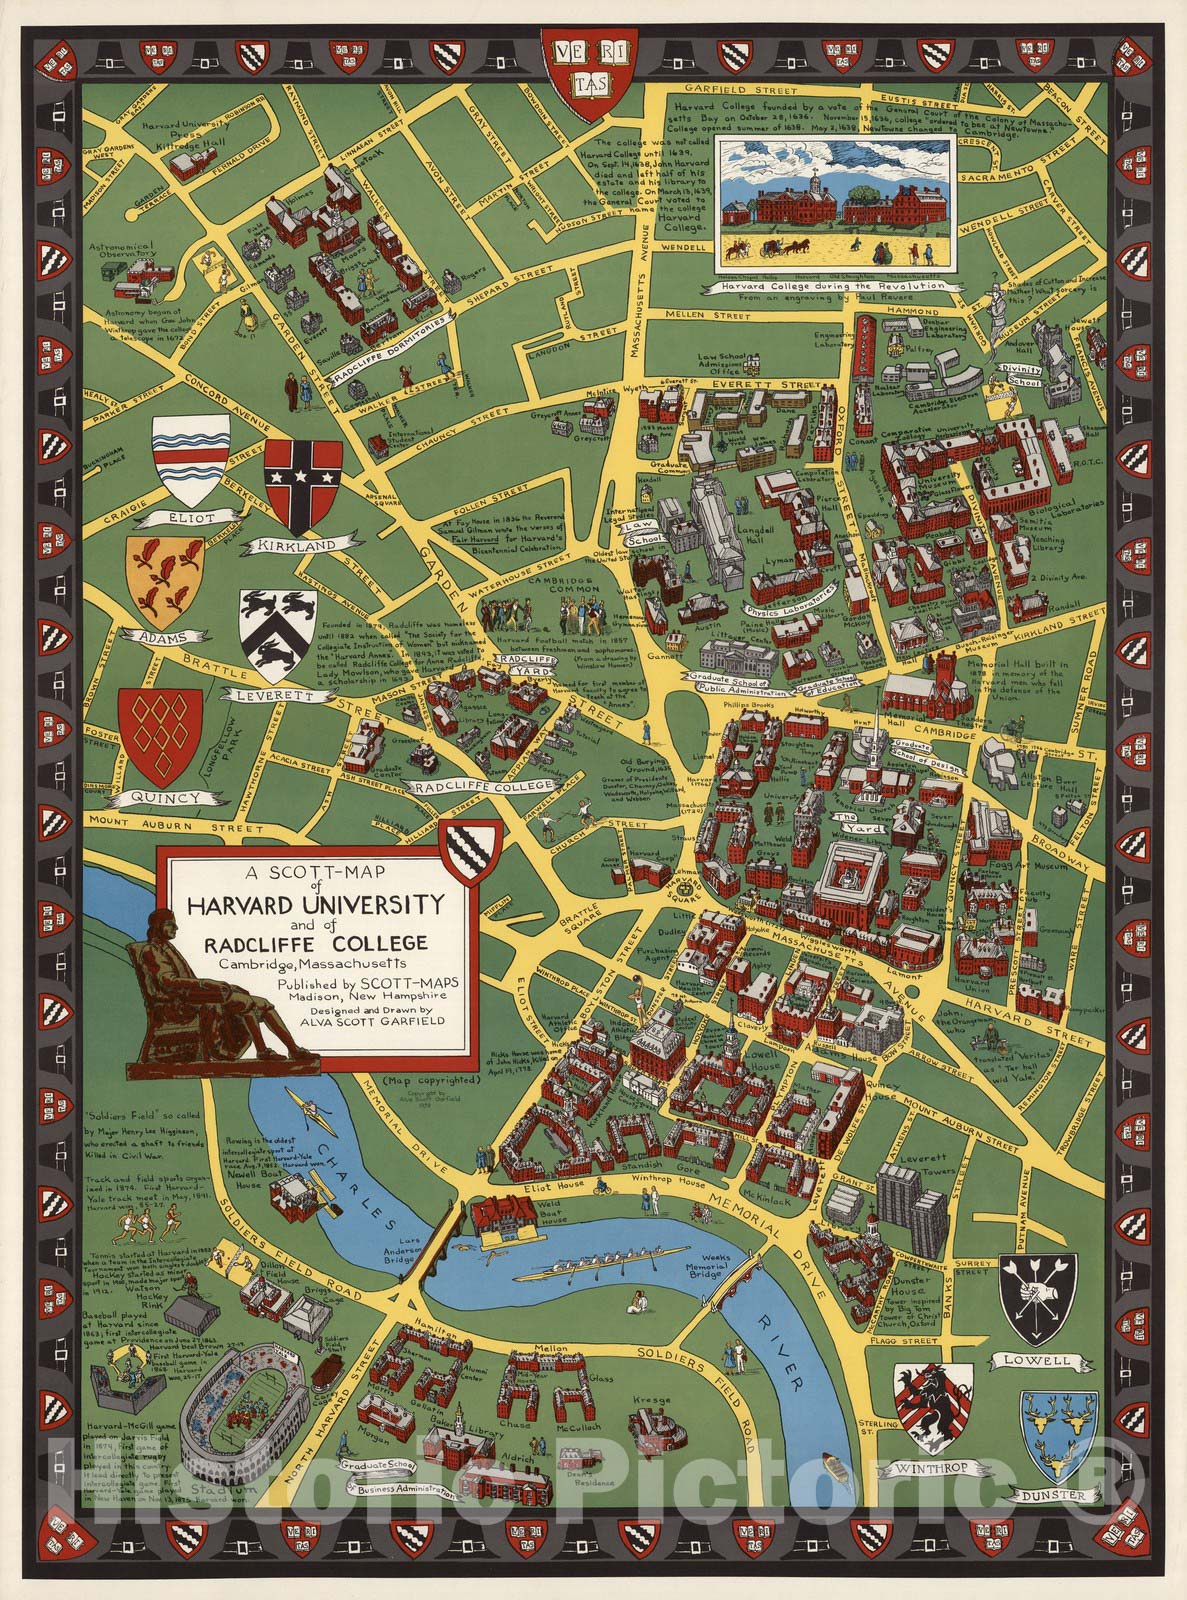 Historic Map - A Scott-Map of Harvard University and of Radcliffe College, Cambridge, Massachusetts, 1959 - Vintage Wall Art